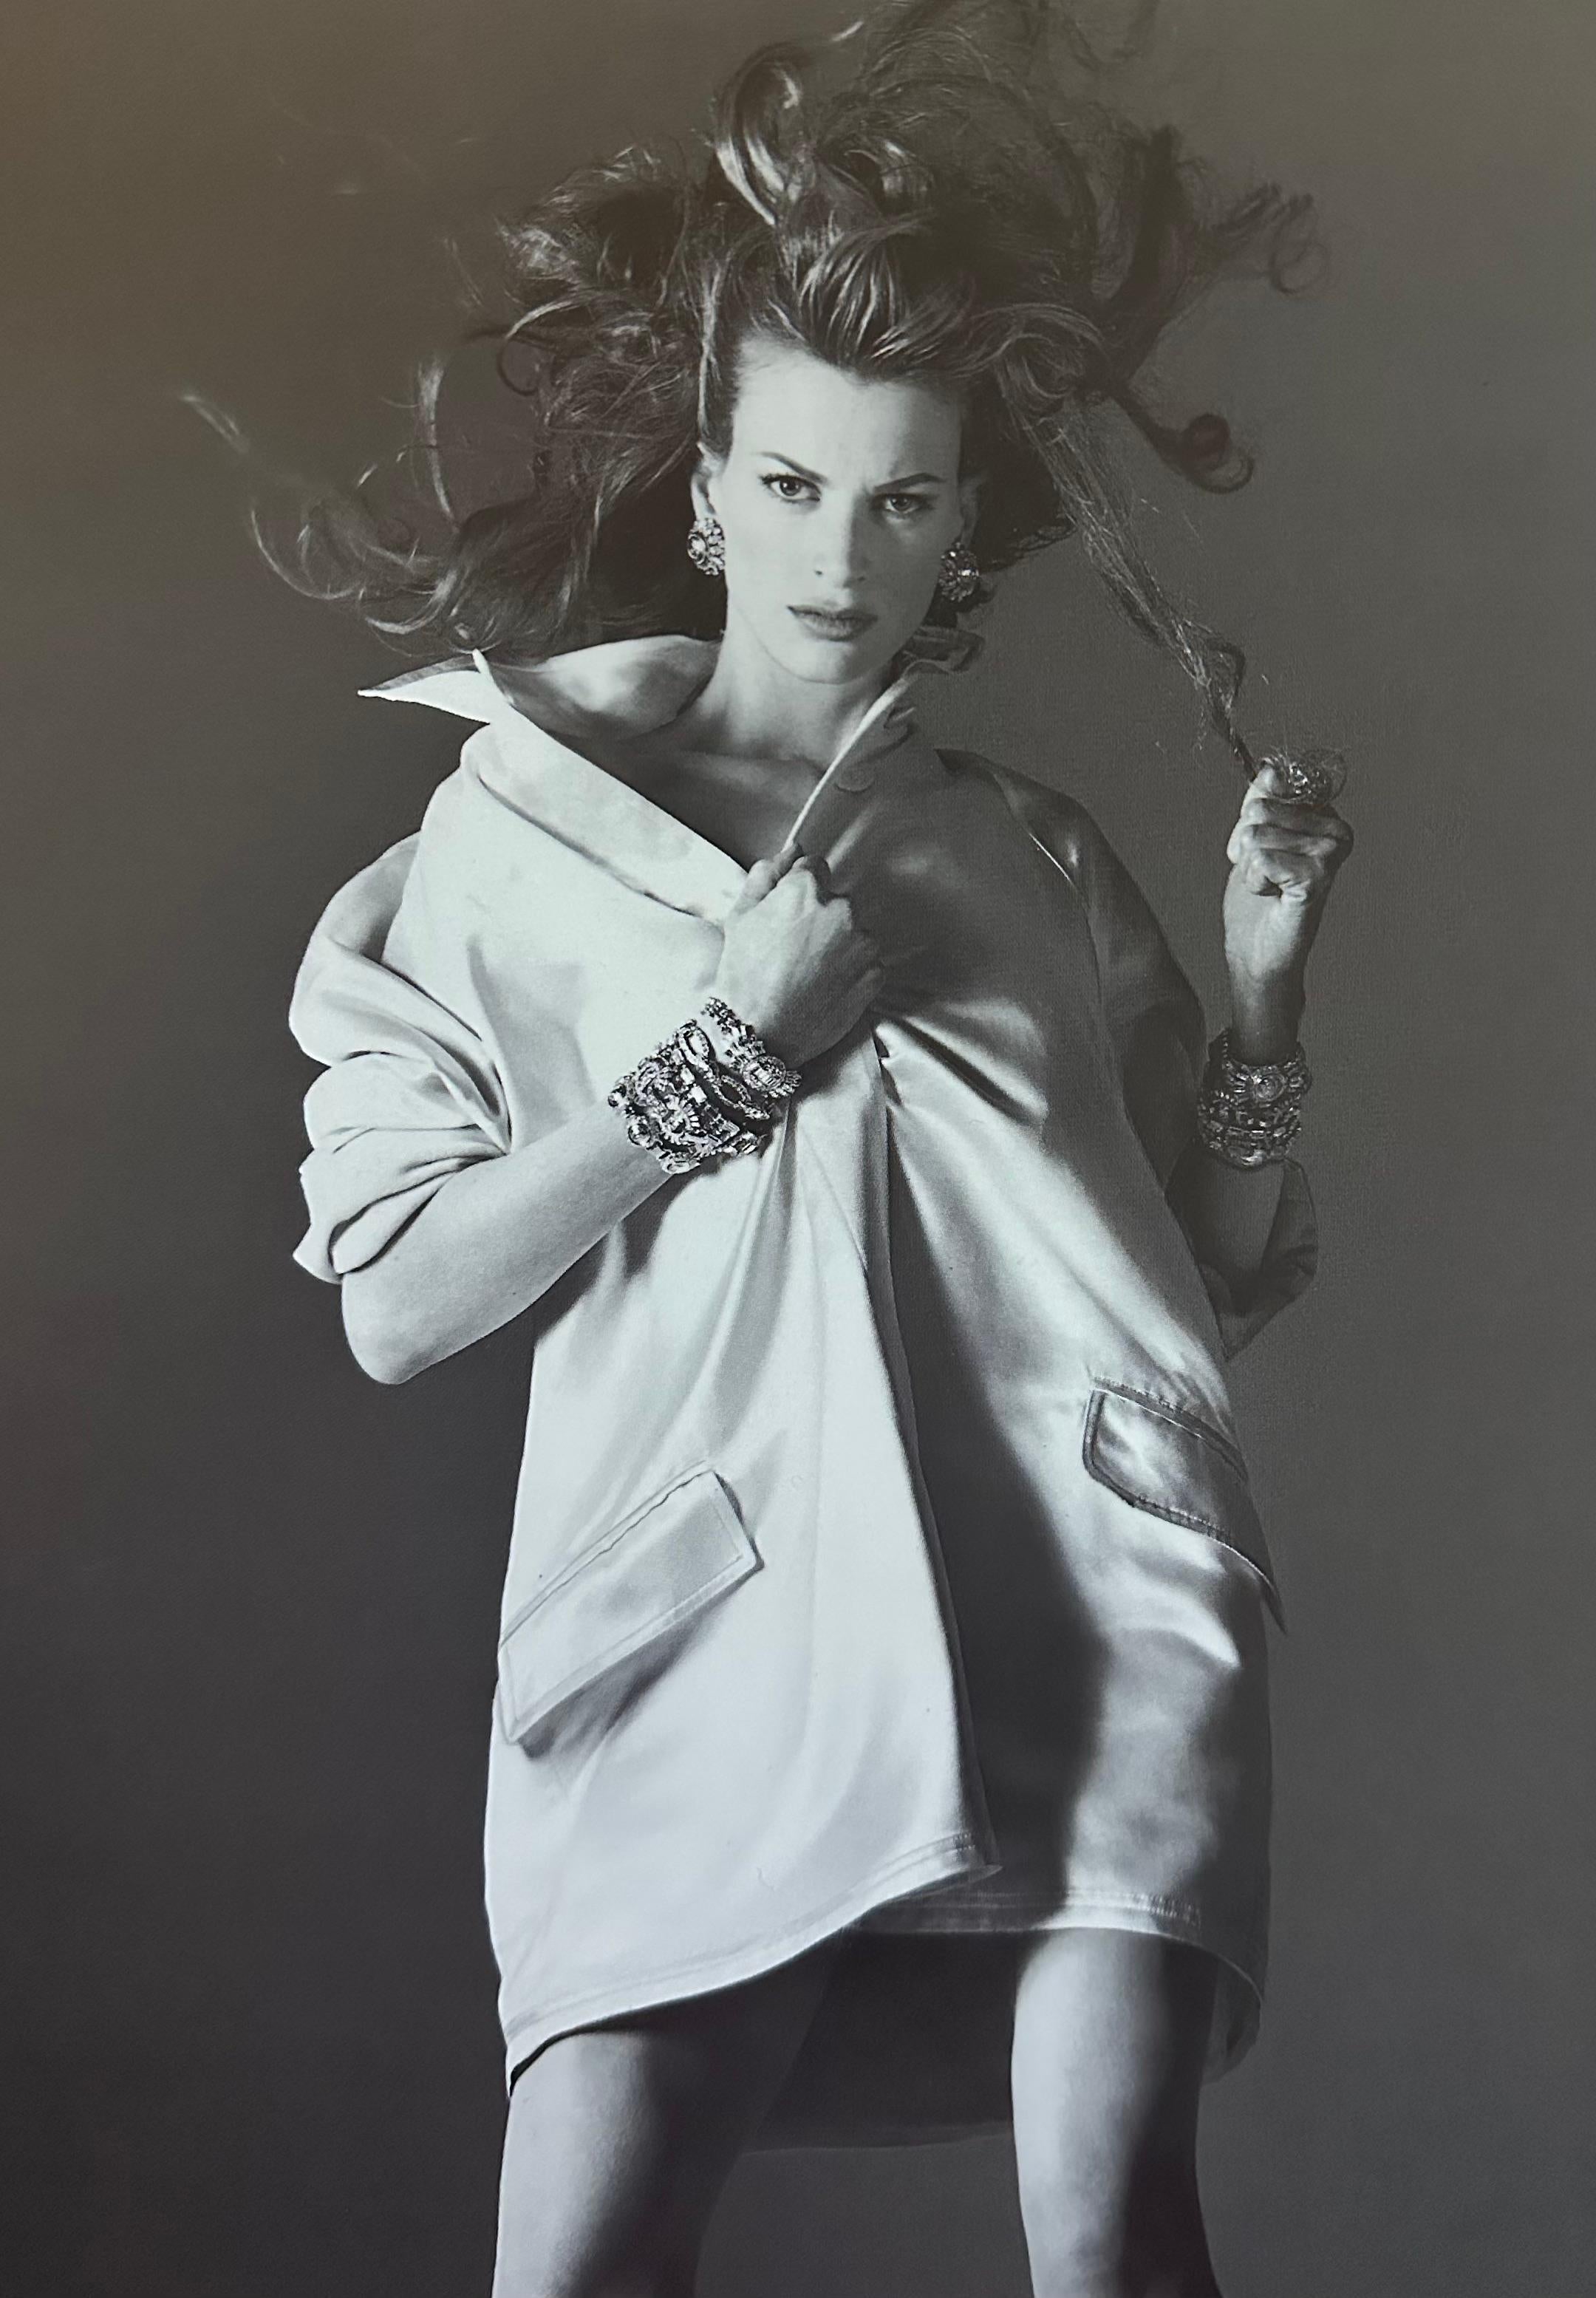 Presenting a fabulous gold tone crystal rhinestone Gianni Versace bracelet, designed by Gianni Versace. From the Fall/Winter 1995 collection, this bracelet was highlighted in the season's ad campaign on Kristen McMenamy, captured by Richard Avedon.